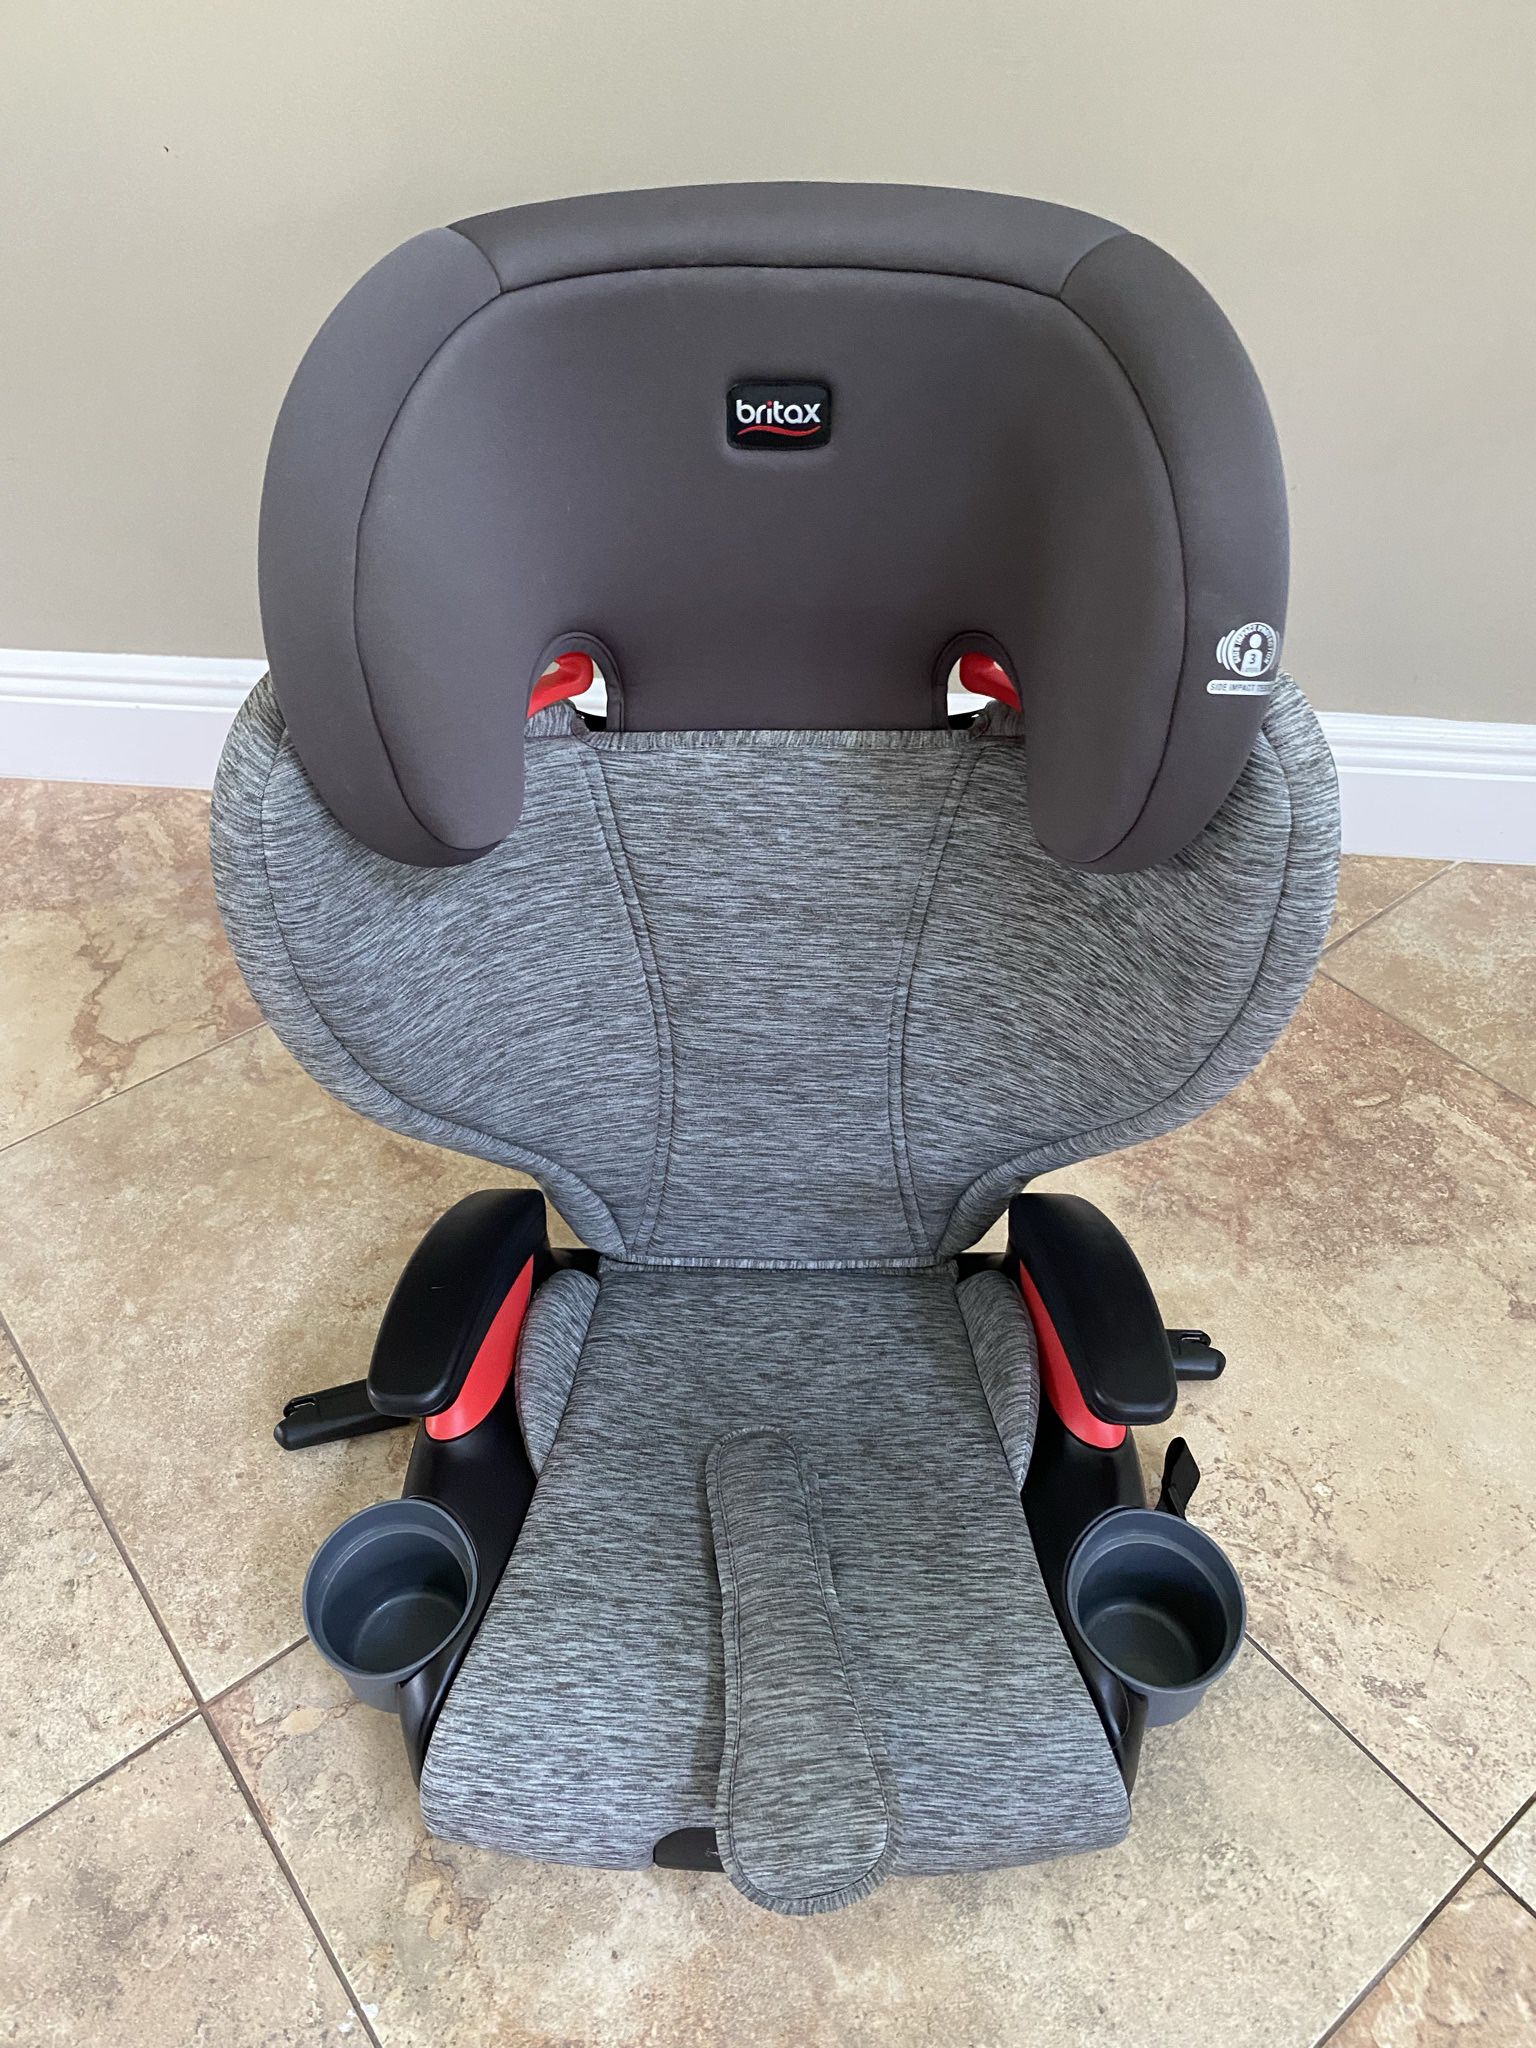 Britax Highpoint 2-Stage Belt-Positioning Booster Car Seat (EXCELLENT CONDITION)